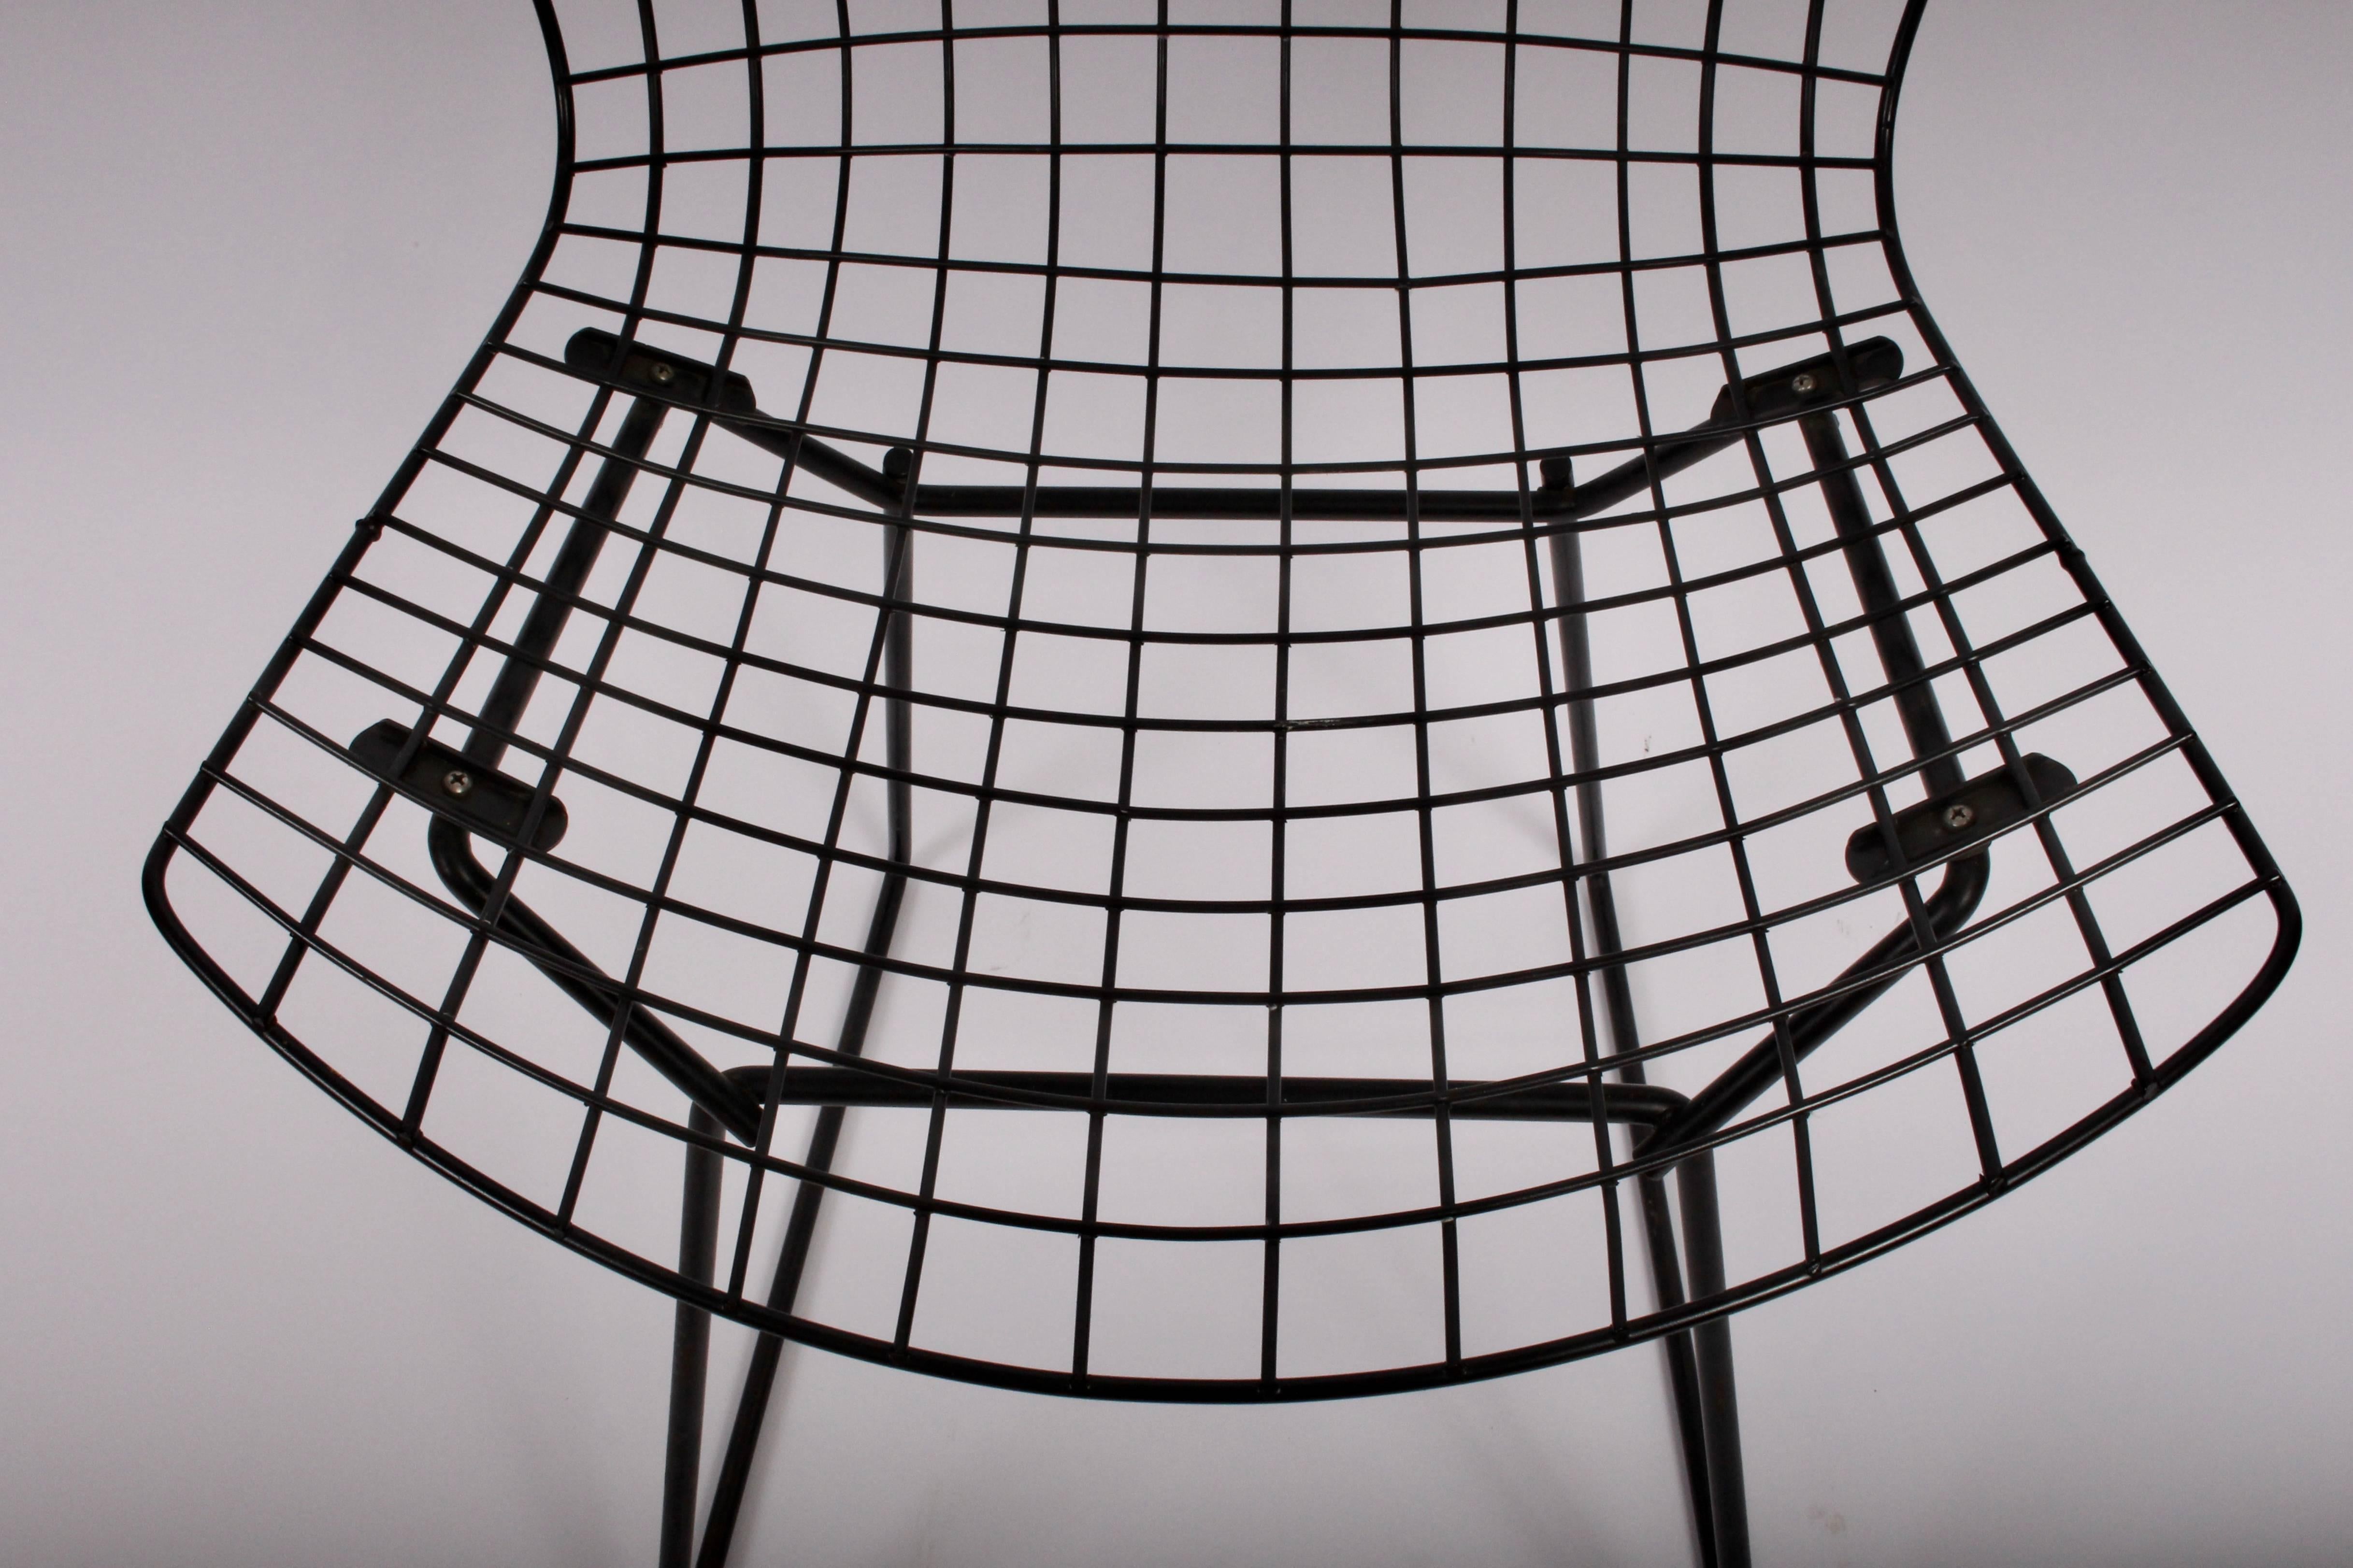 American Set of Four Original Harry Bertoia for Knoll Black Wire Side Chairs, circa 1960